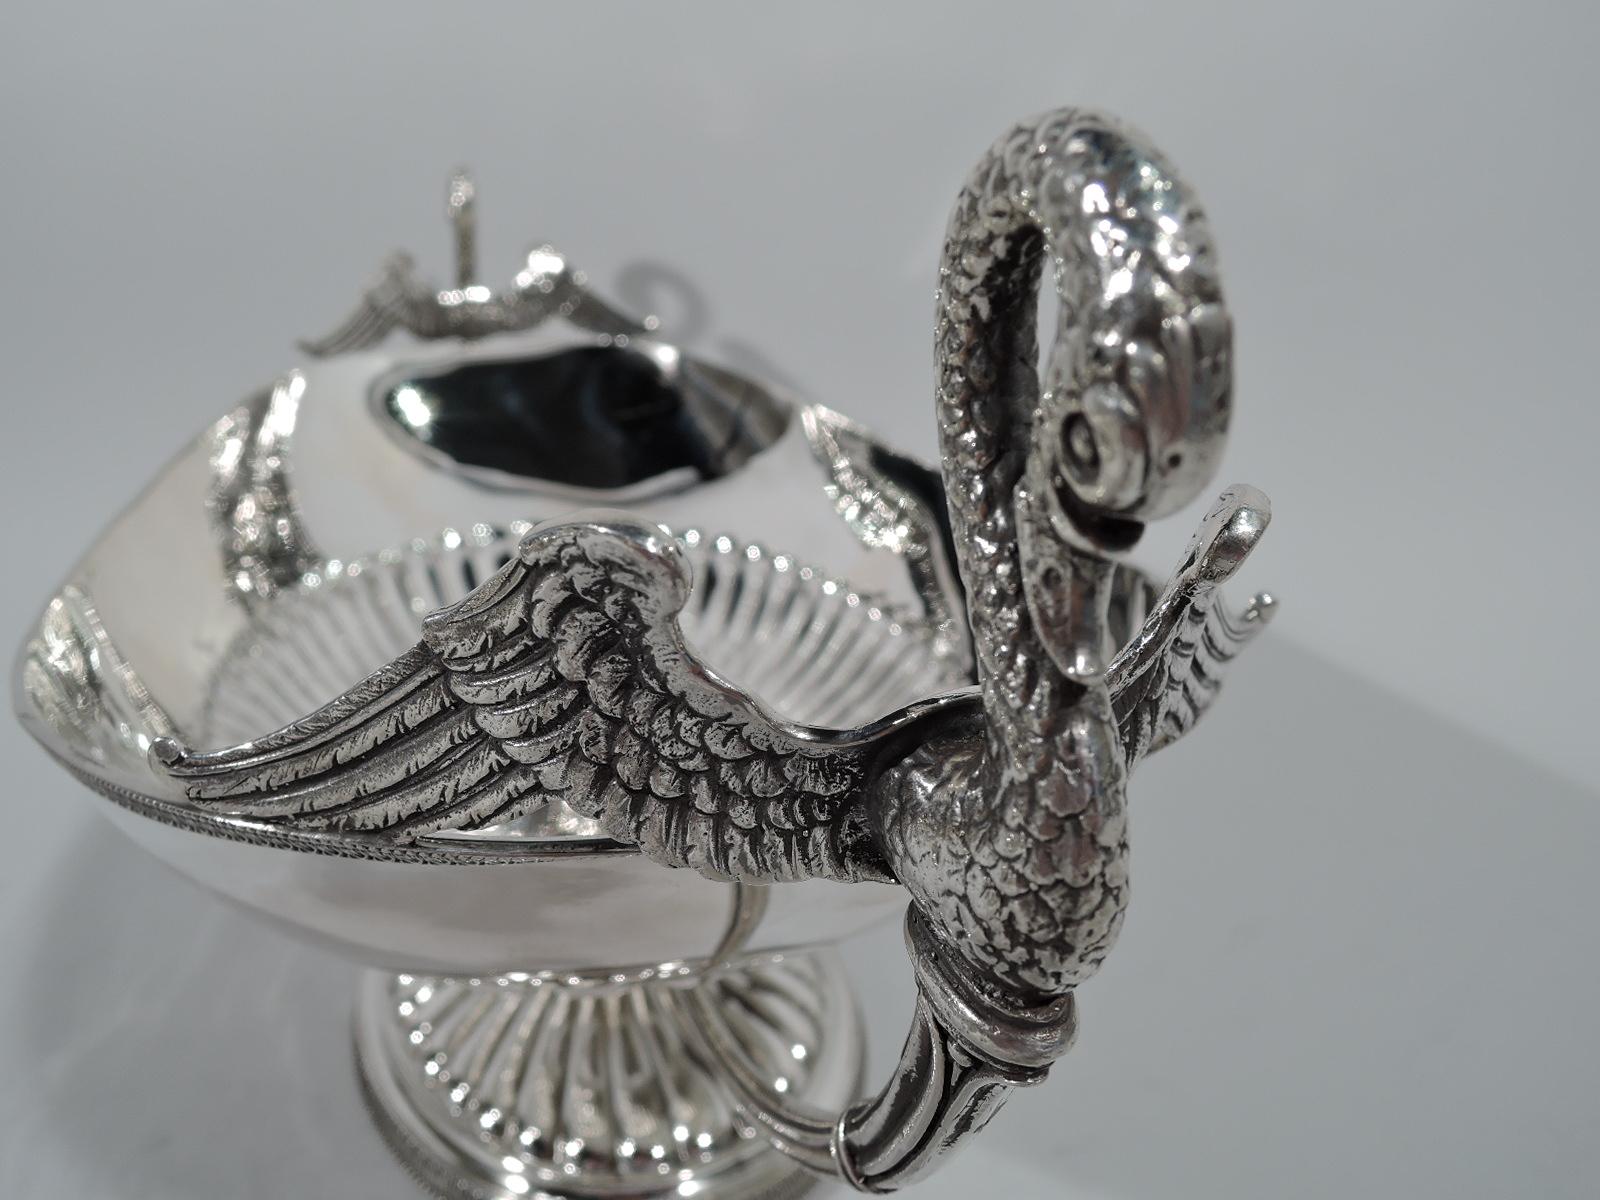 Empire Revival Italian Classical Empire Silver Footed Centerpiece Swan Bowl